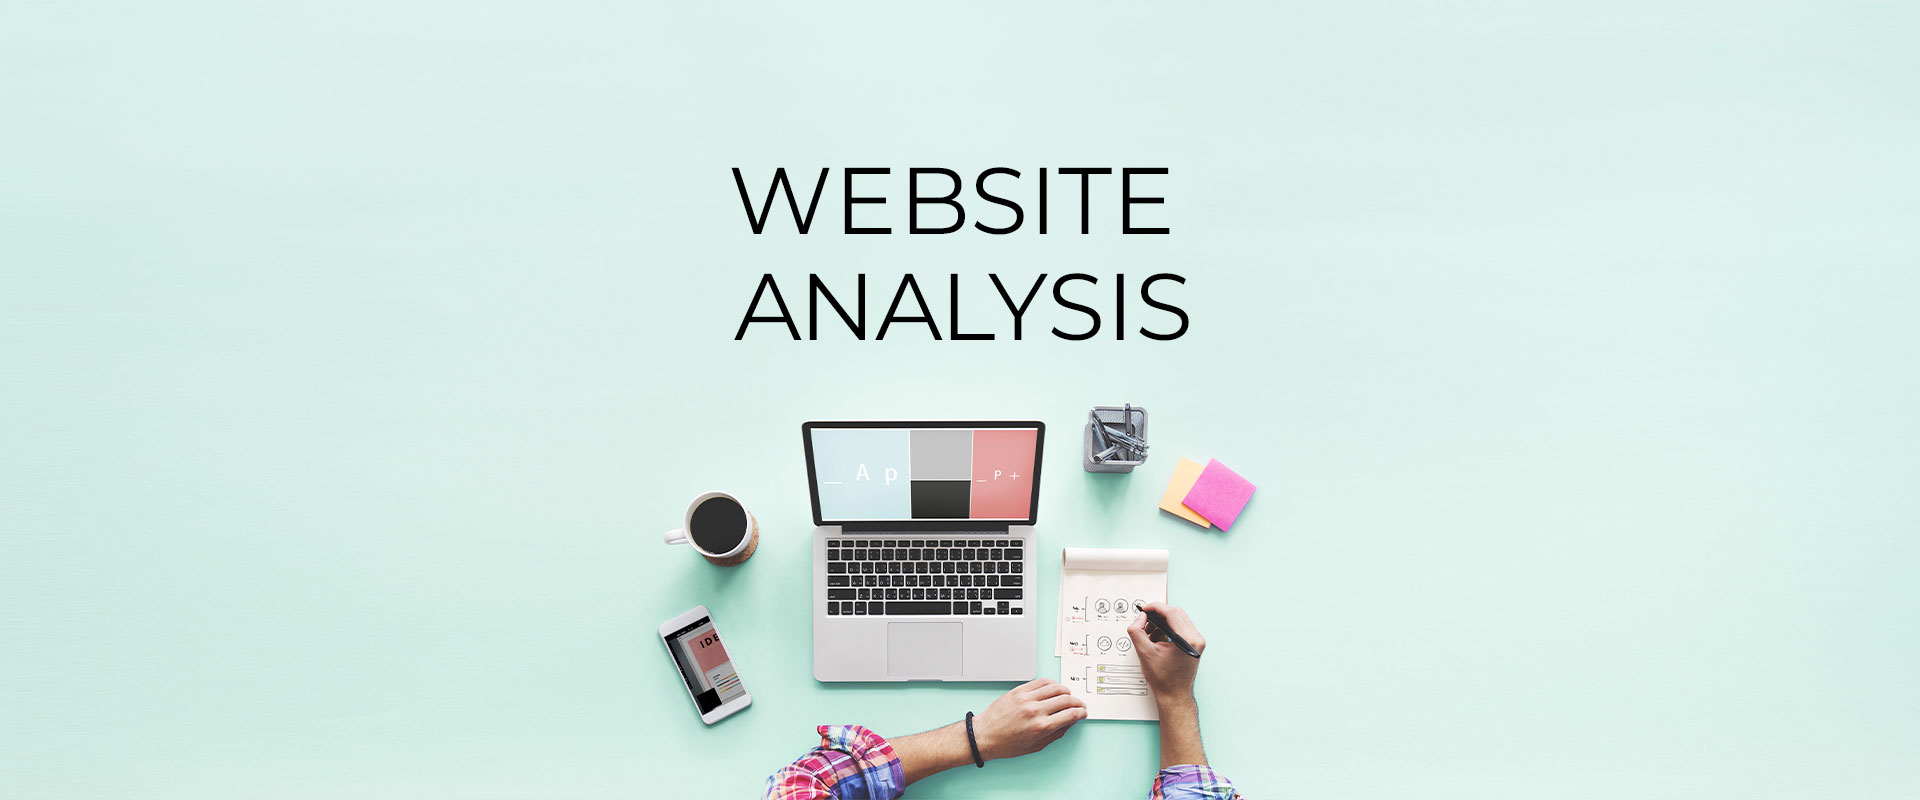 Covid-19: It’s Time to Do Website Analysis [10 Tips & Tools]